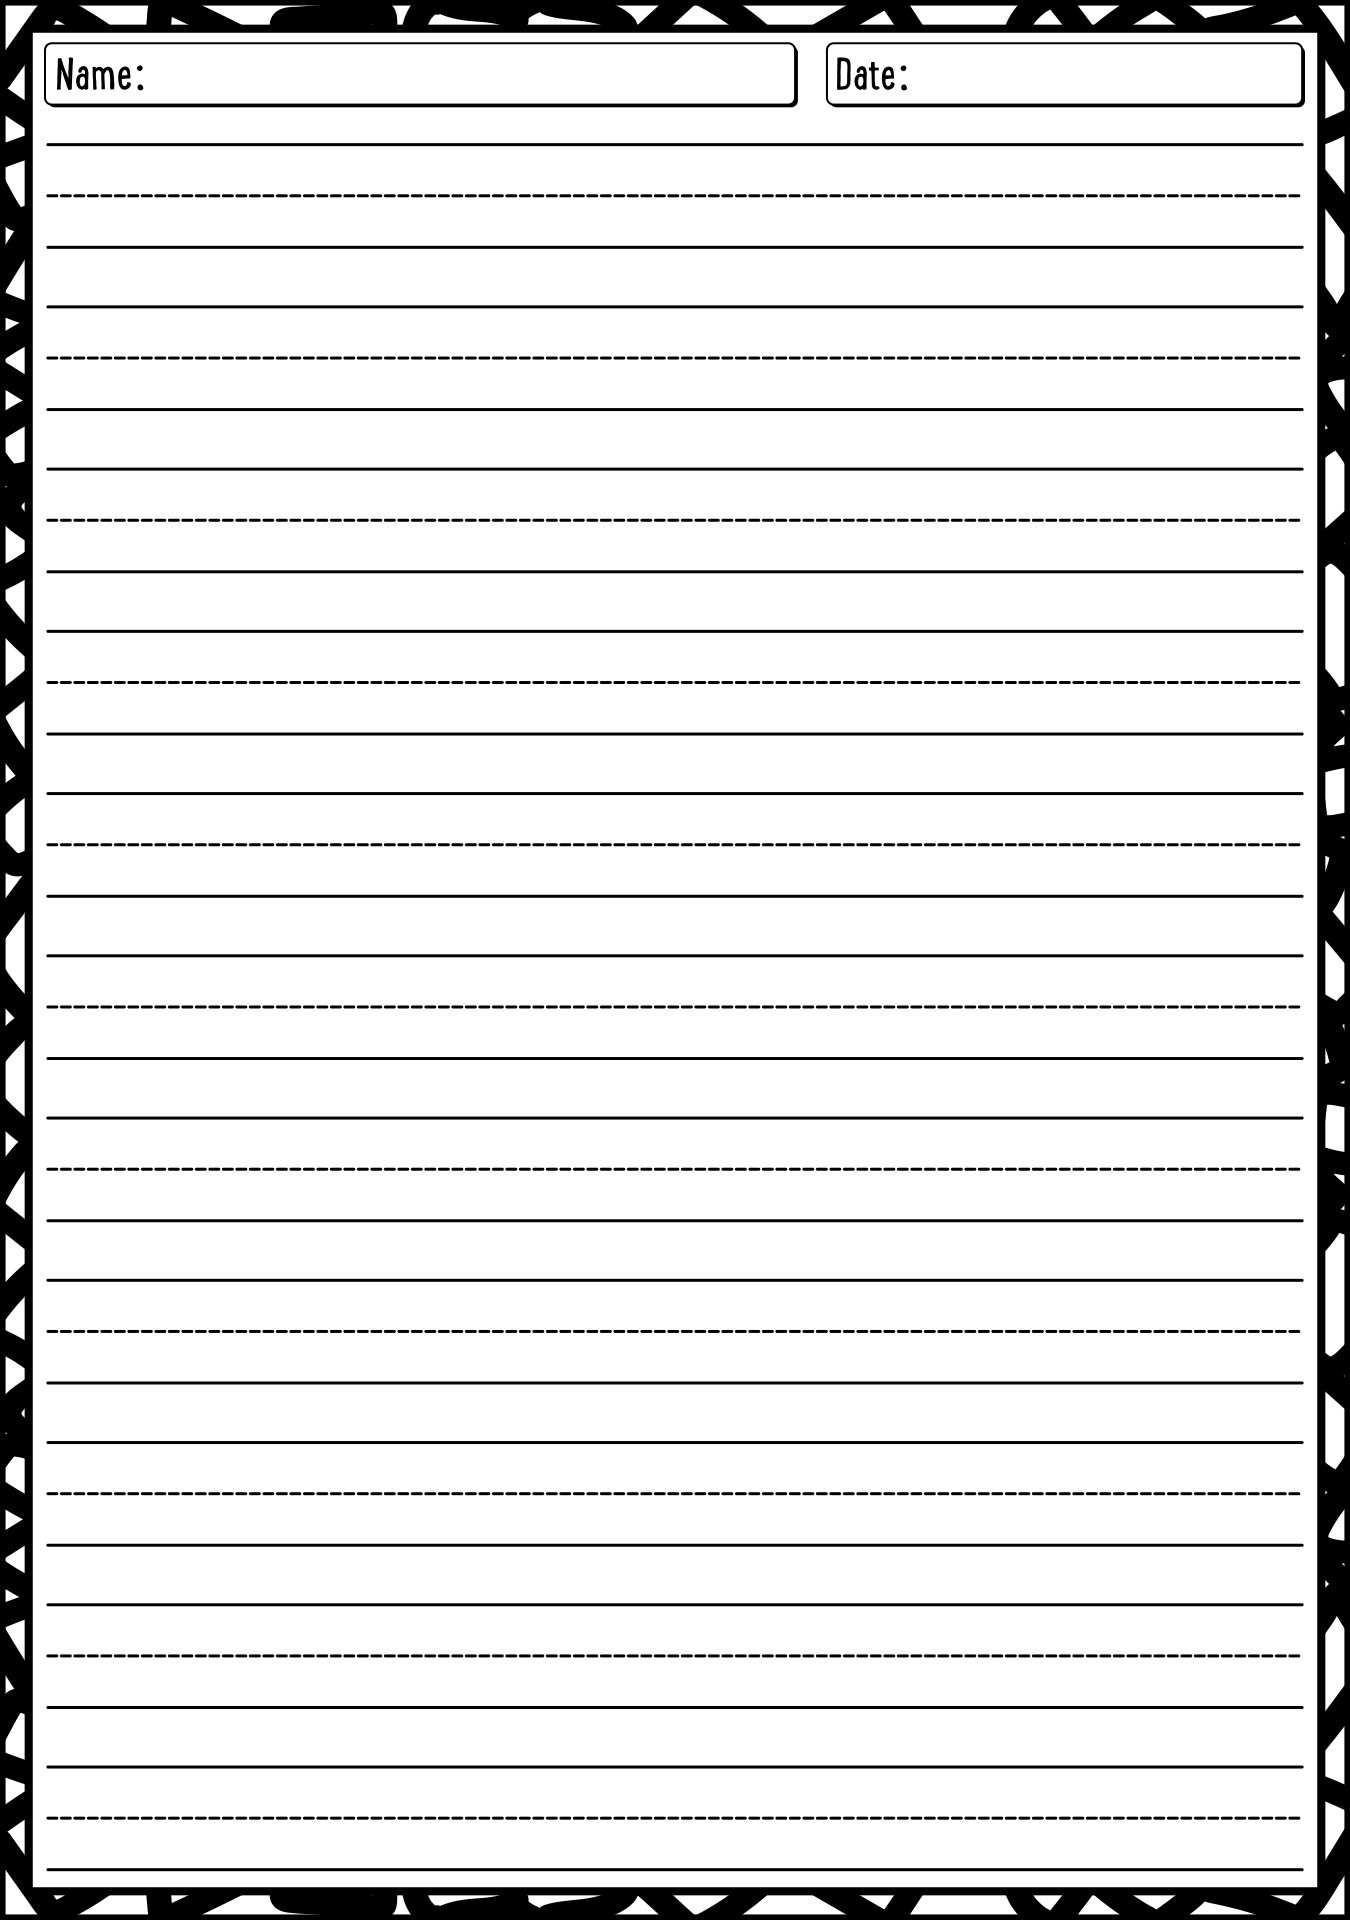 15 Best Images of Long Lined Paper Worksheets 4th Grade ...